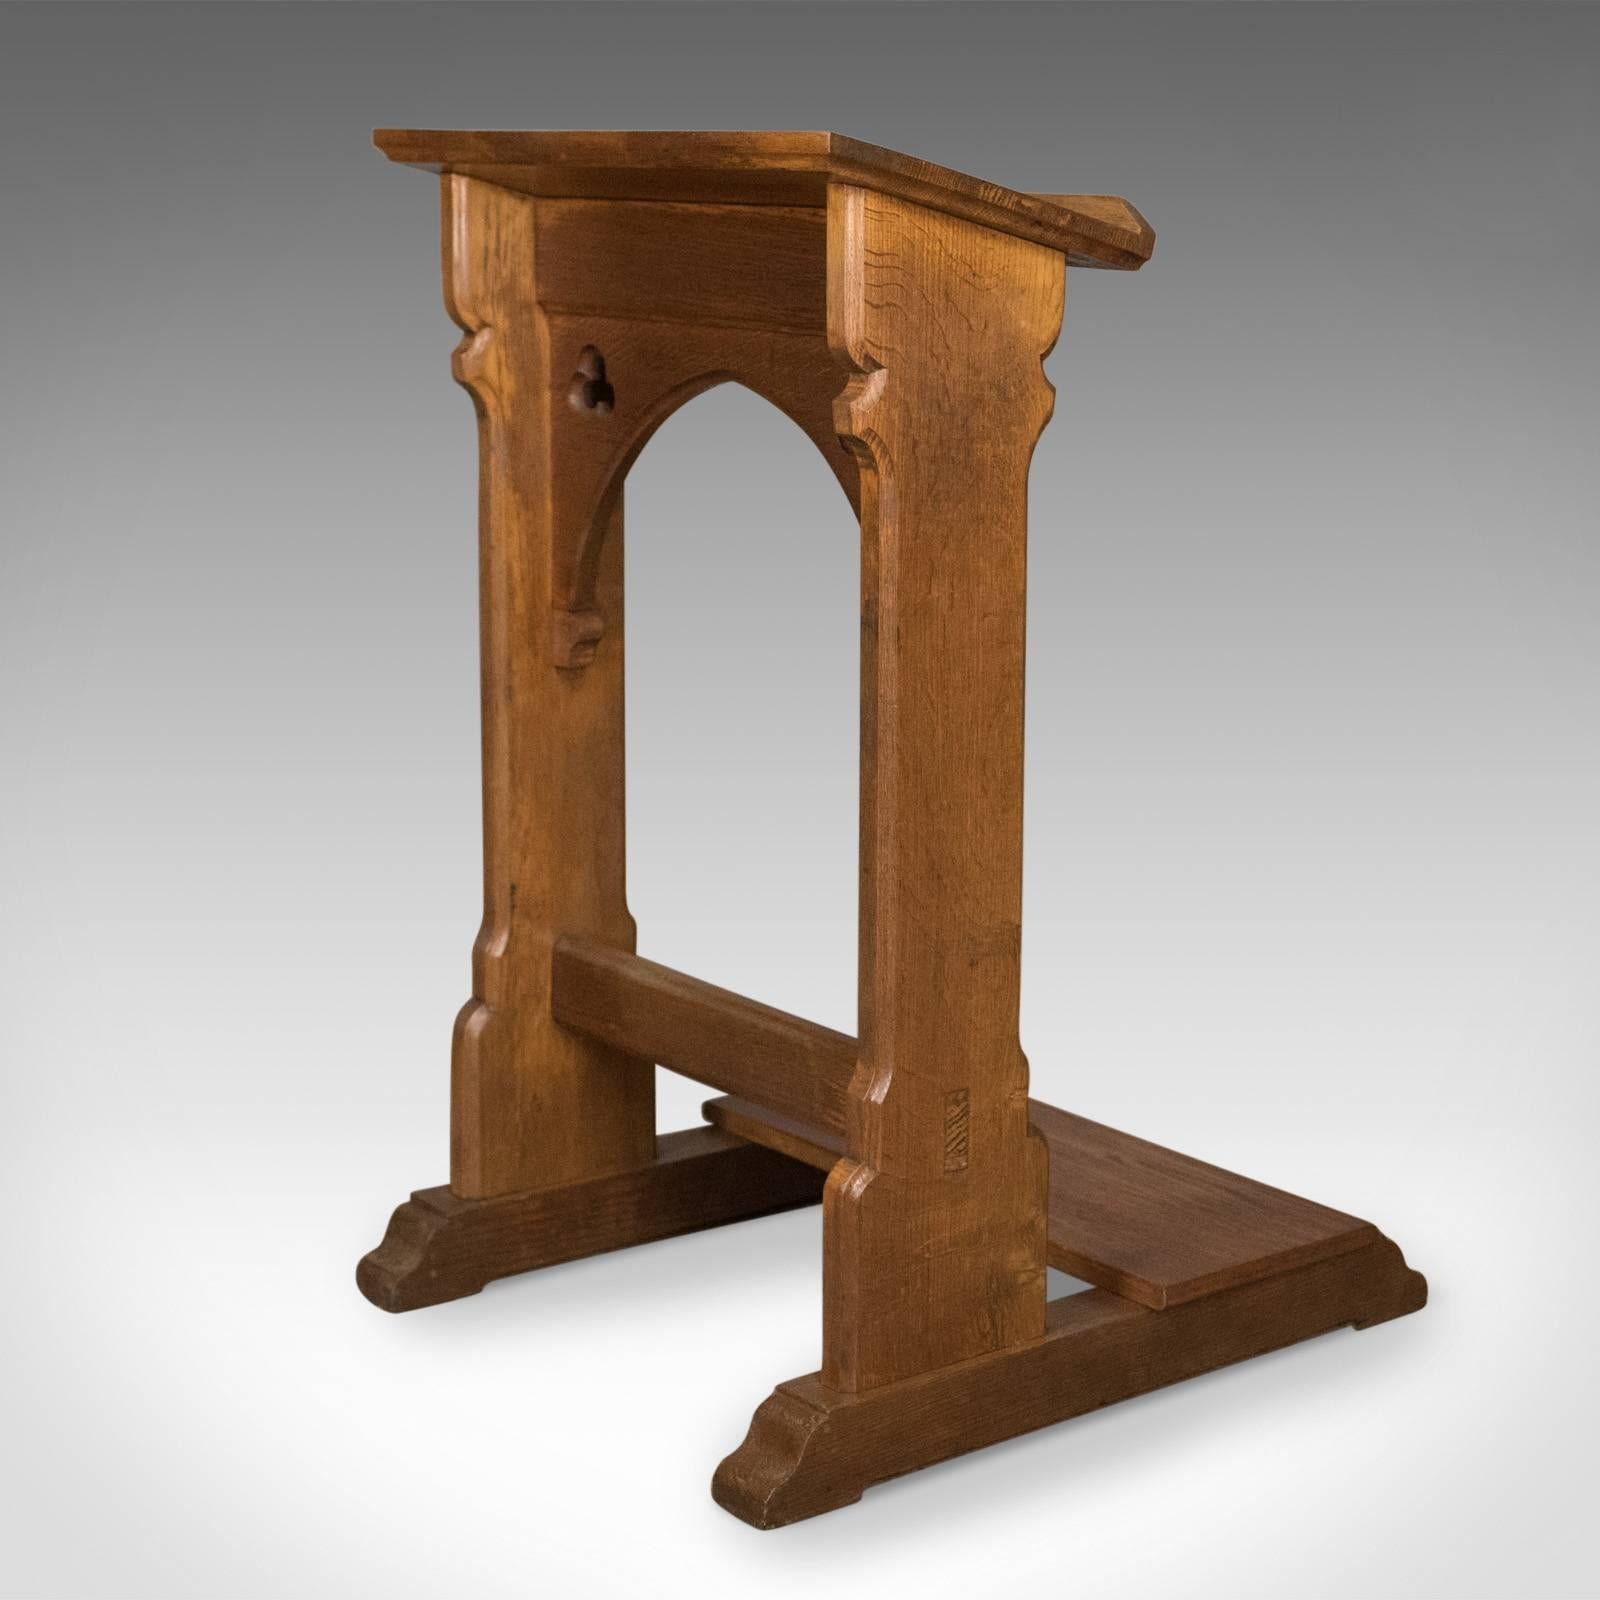 This is an antique lectern, an English oak, prayer, book or music stand. Scottish, Victorian Gothic, dating to the late 19th century, circa 1880.

Delightful russet tones to the English oak
Grain interest through the lustrous, wax polished